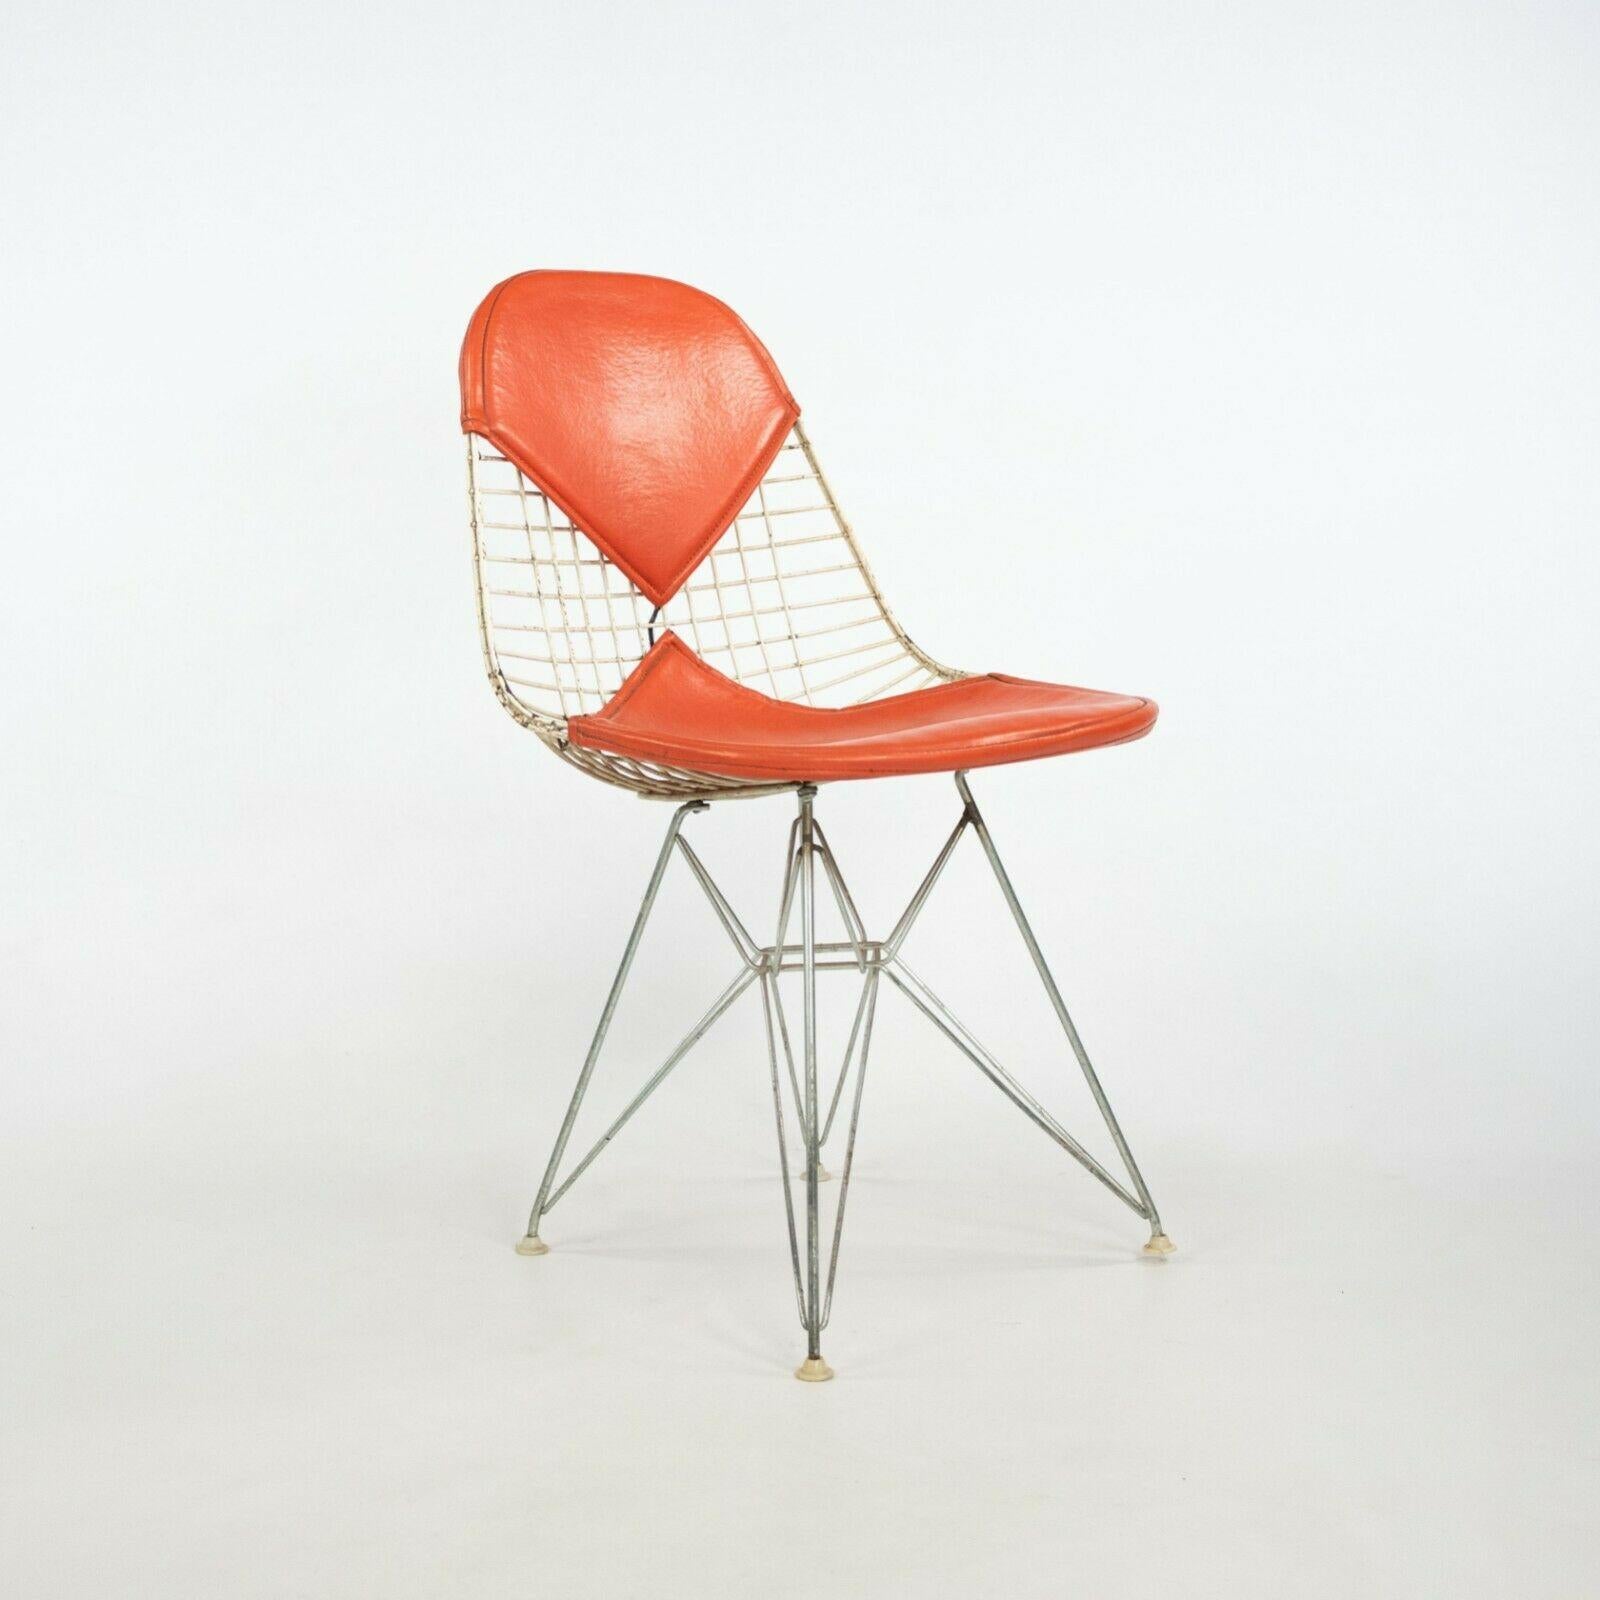 1957 Herman Miller Eames DKR-2 Dining / Side Chairs Set of Five with Orange Pads For Sale 2